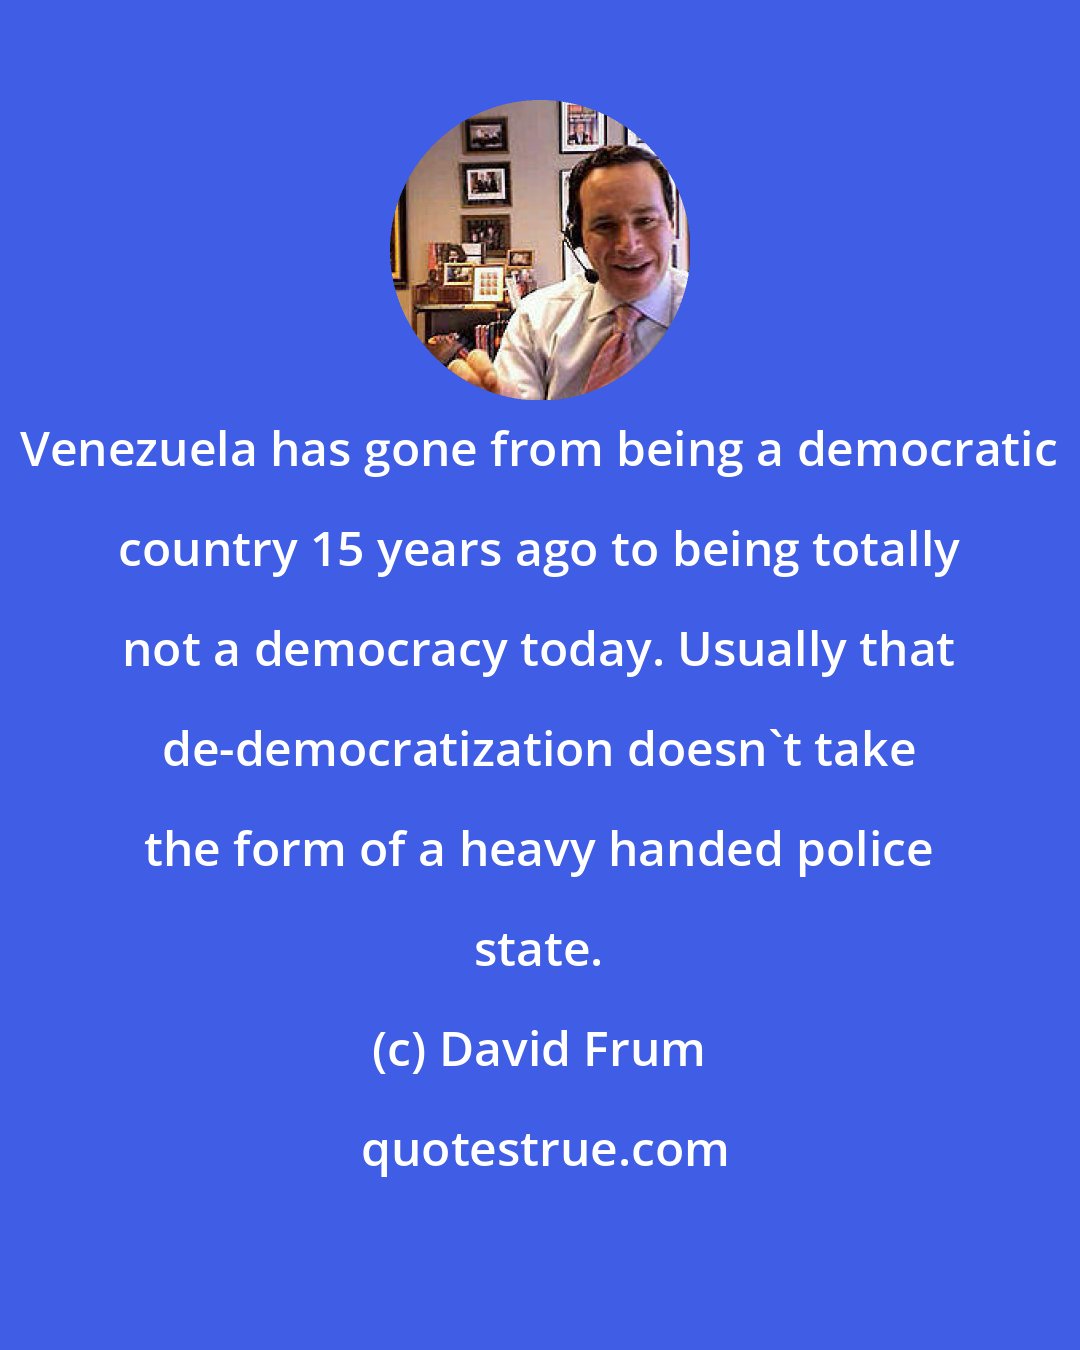 David Frum: Venezuela has gone from being a democratic country 15 years ago to being totally not a democracy today. Usually that de-democratization doesn't take the form of a heavy handed police state.